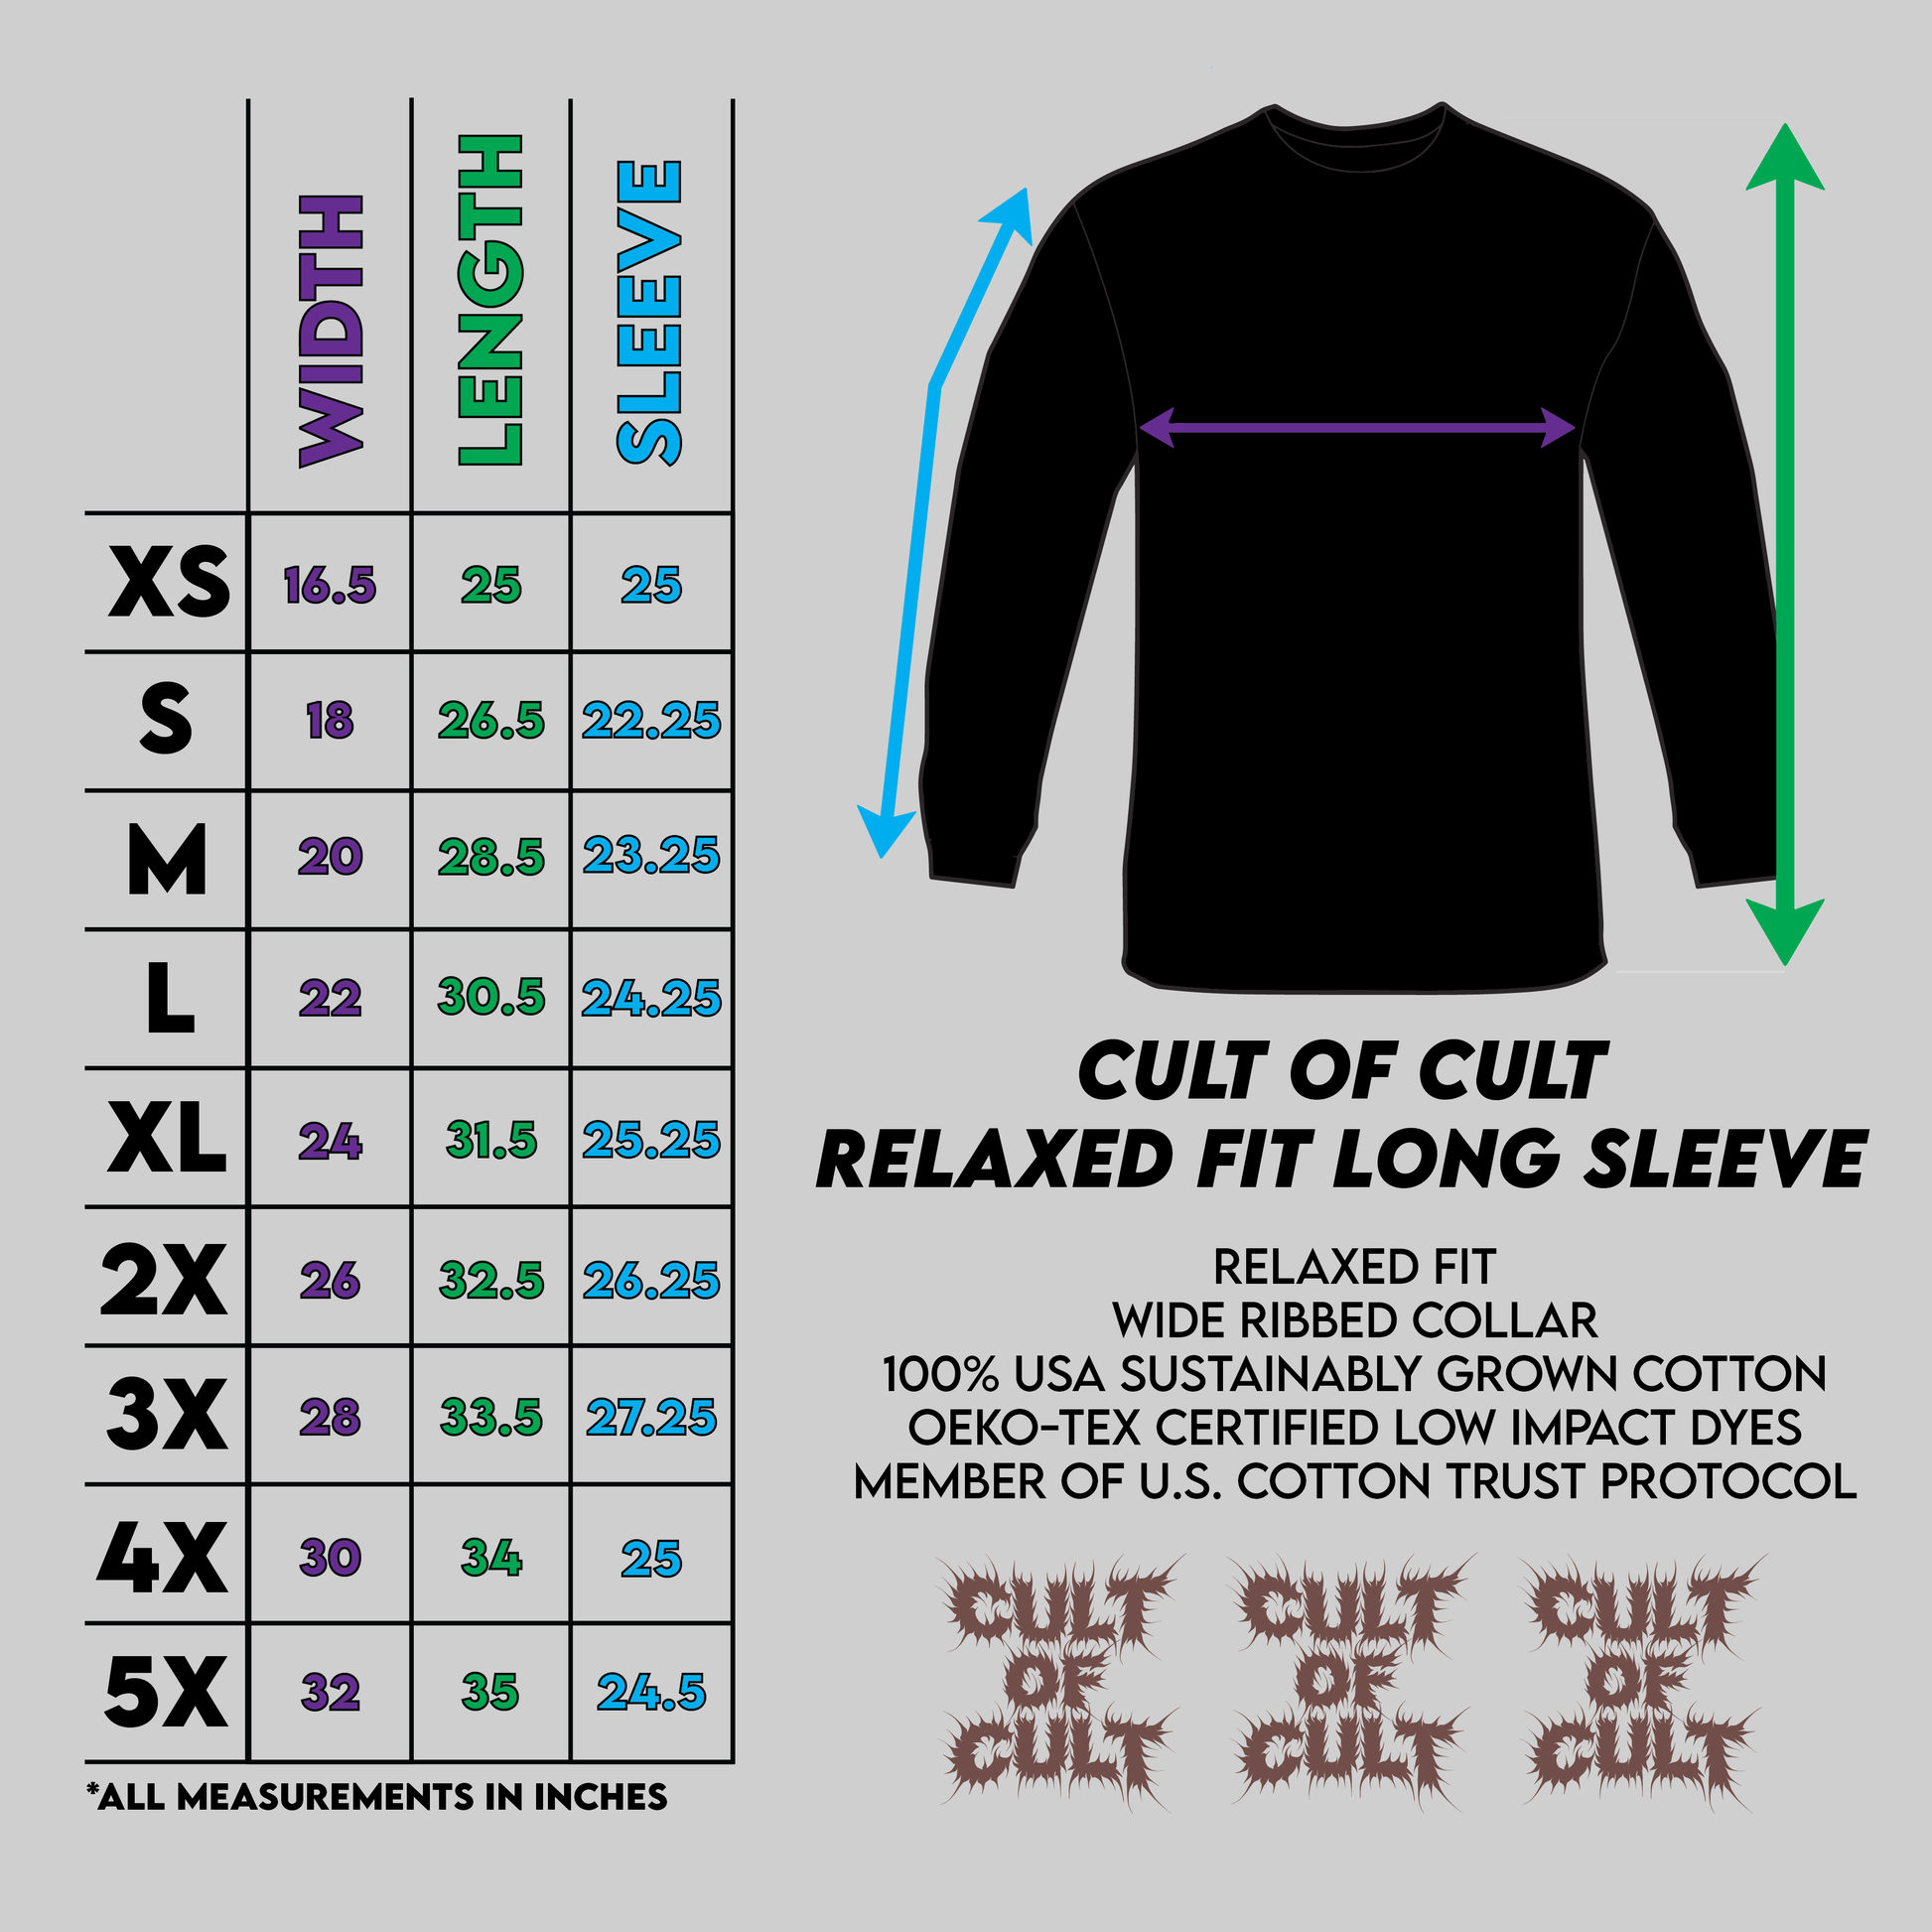 Cult of Cult Long Sleeve Cotton Sizing Chart